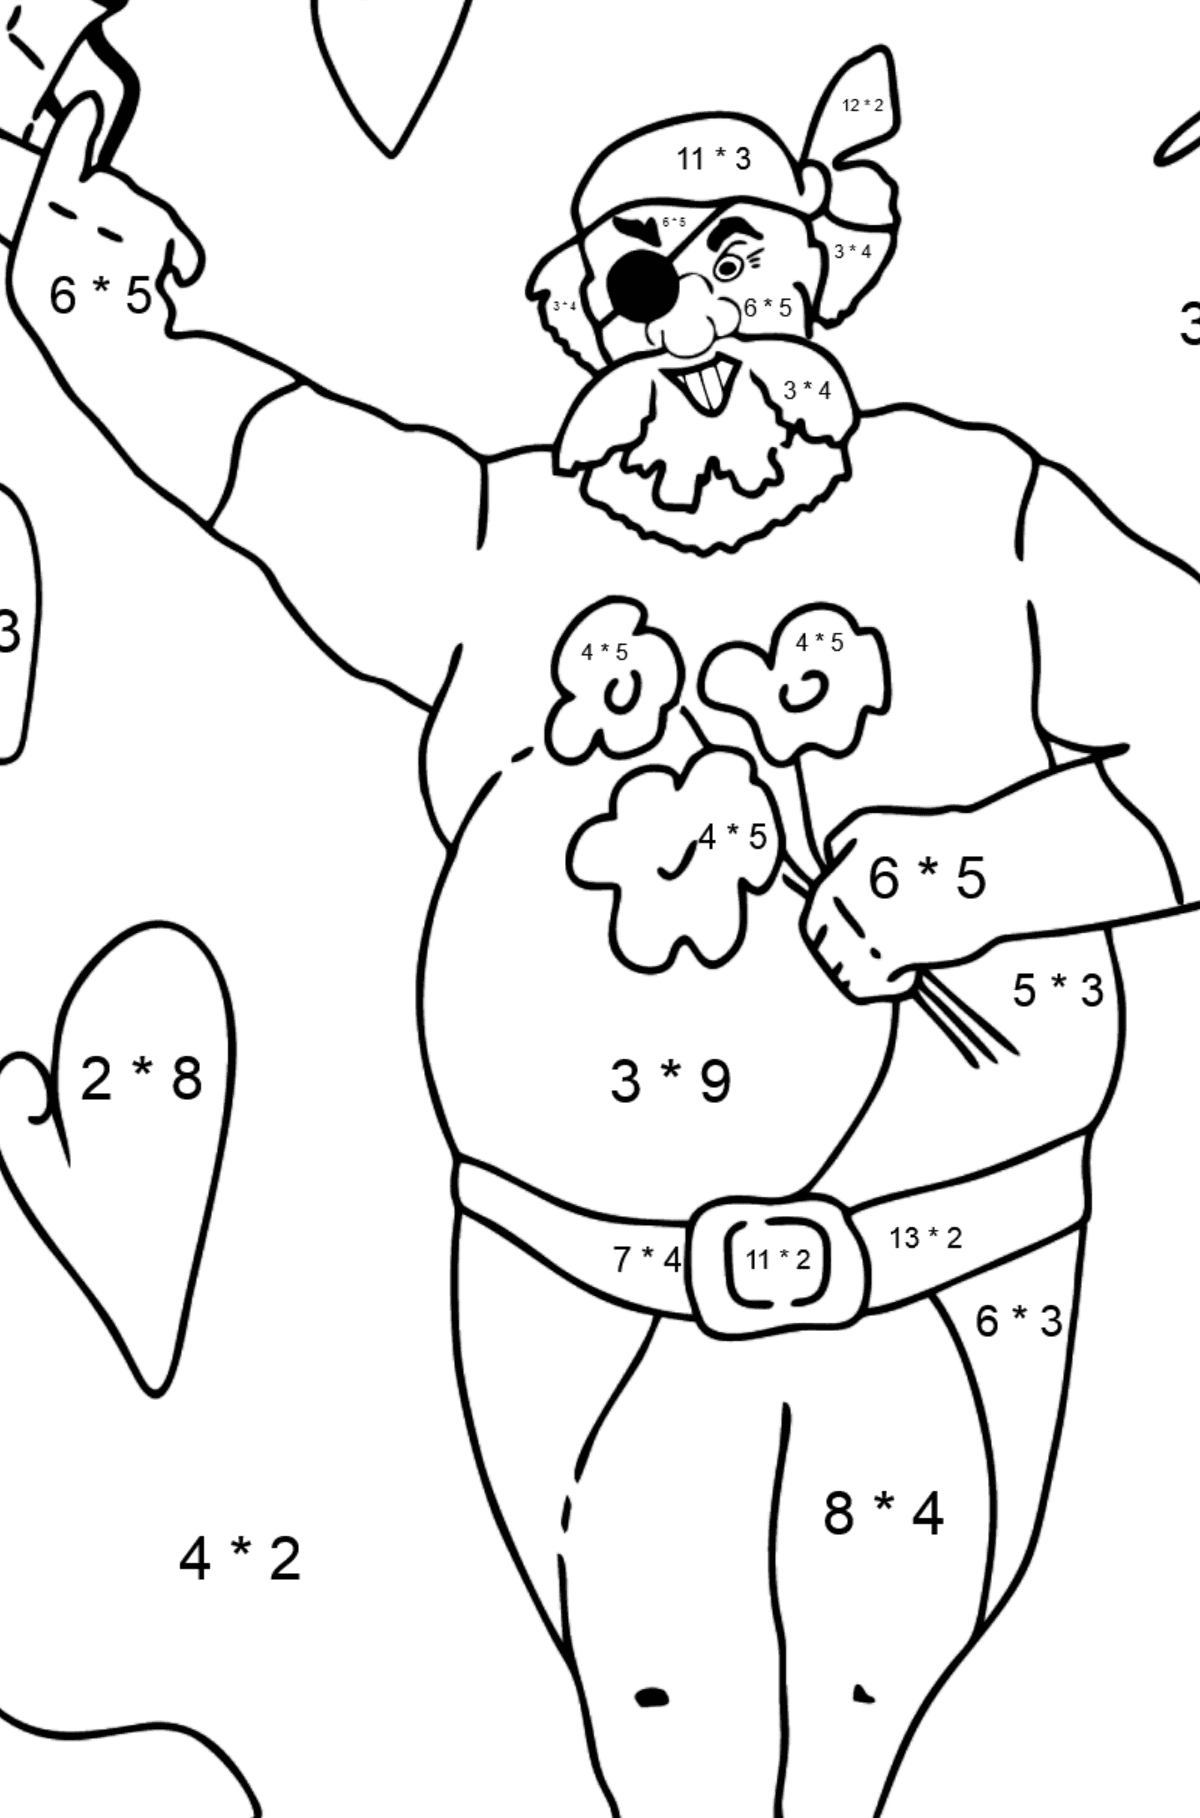 Coloring Page - A Romantic Pirate - Math Coloring - Multiplication for Kids